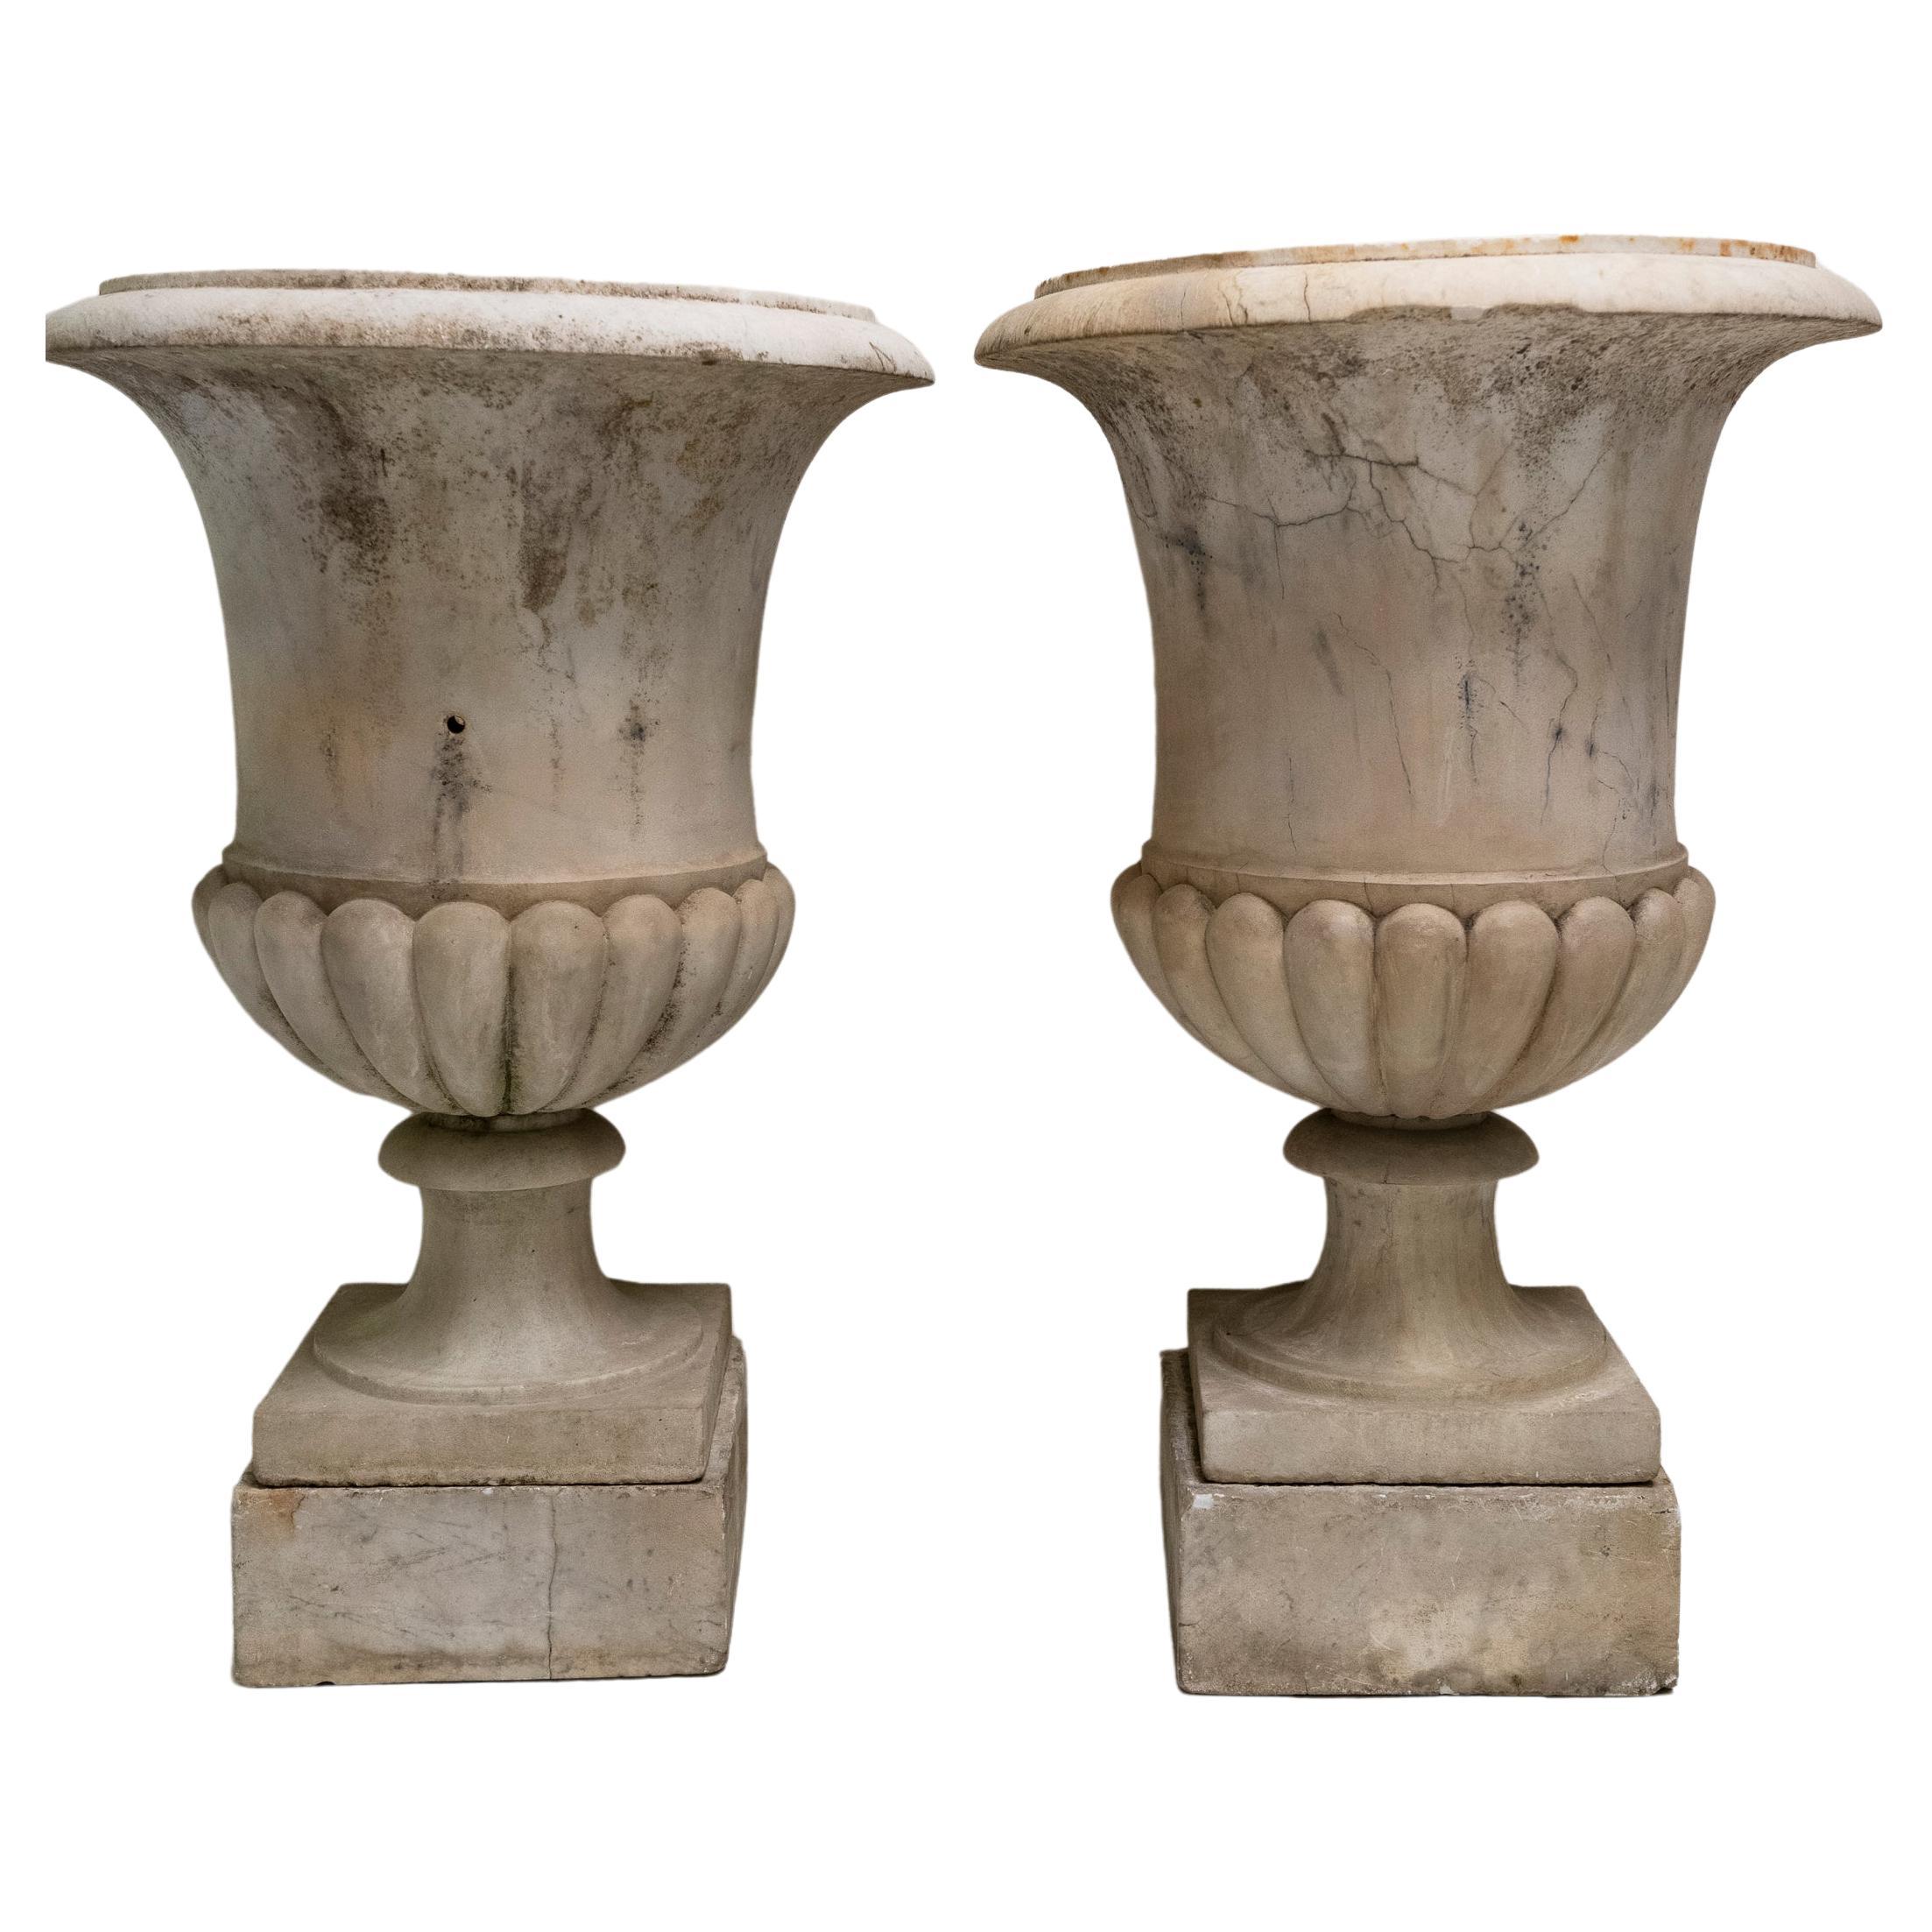 18th Century Carrara Marble Medici Urn Planter with Marble Stand, a Pair